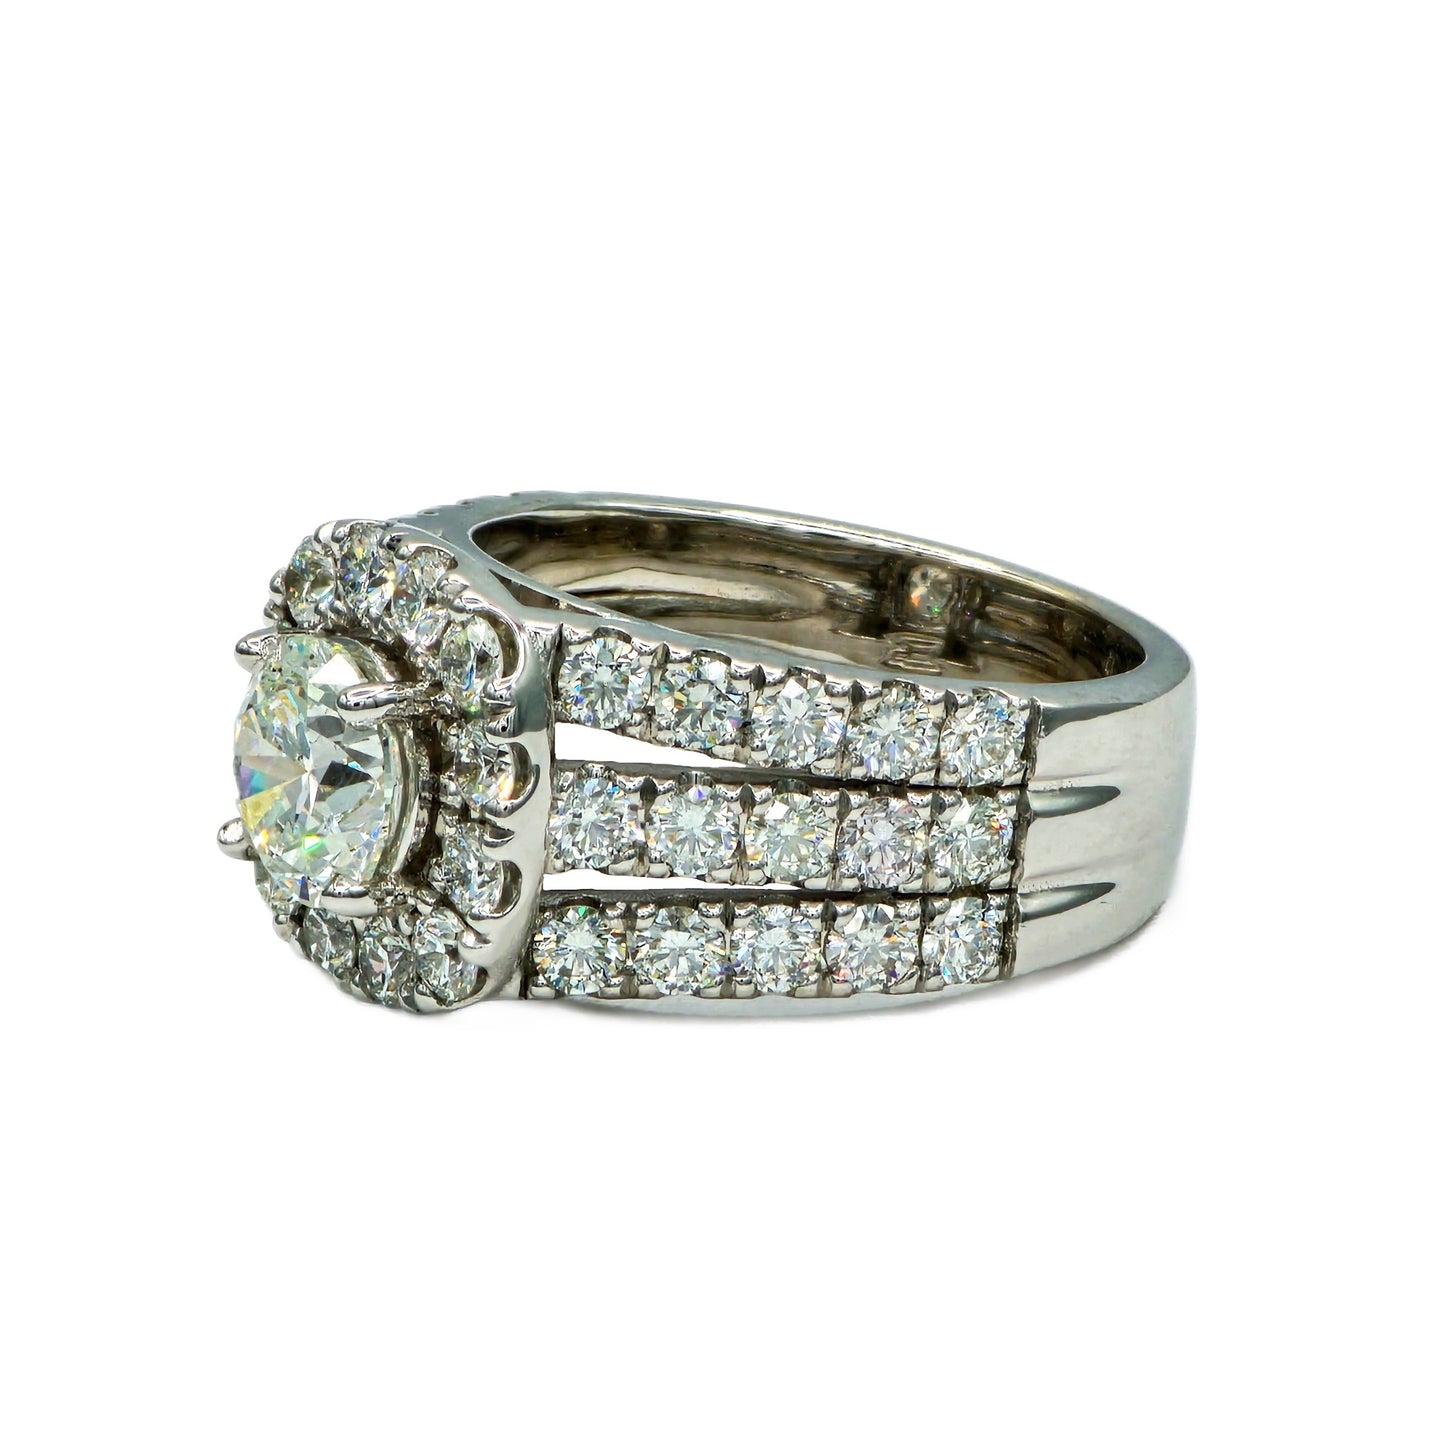 1.30 Carat G/SI2 Round Brilliant Cut with 42=2.17Ctw DIamond Ring in 14K White Gold, GIA Report